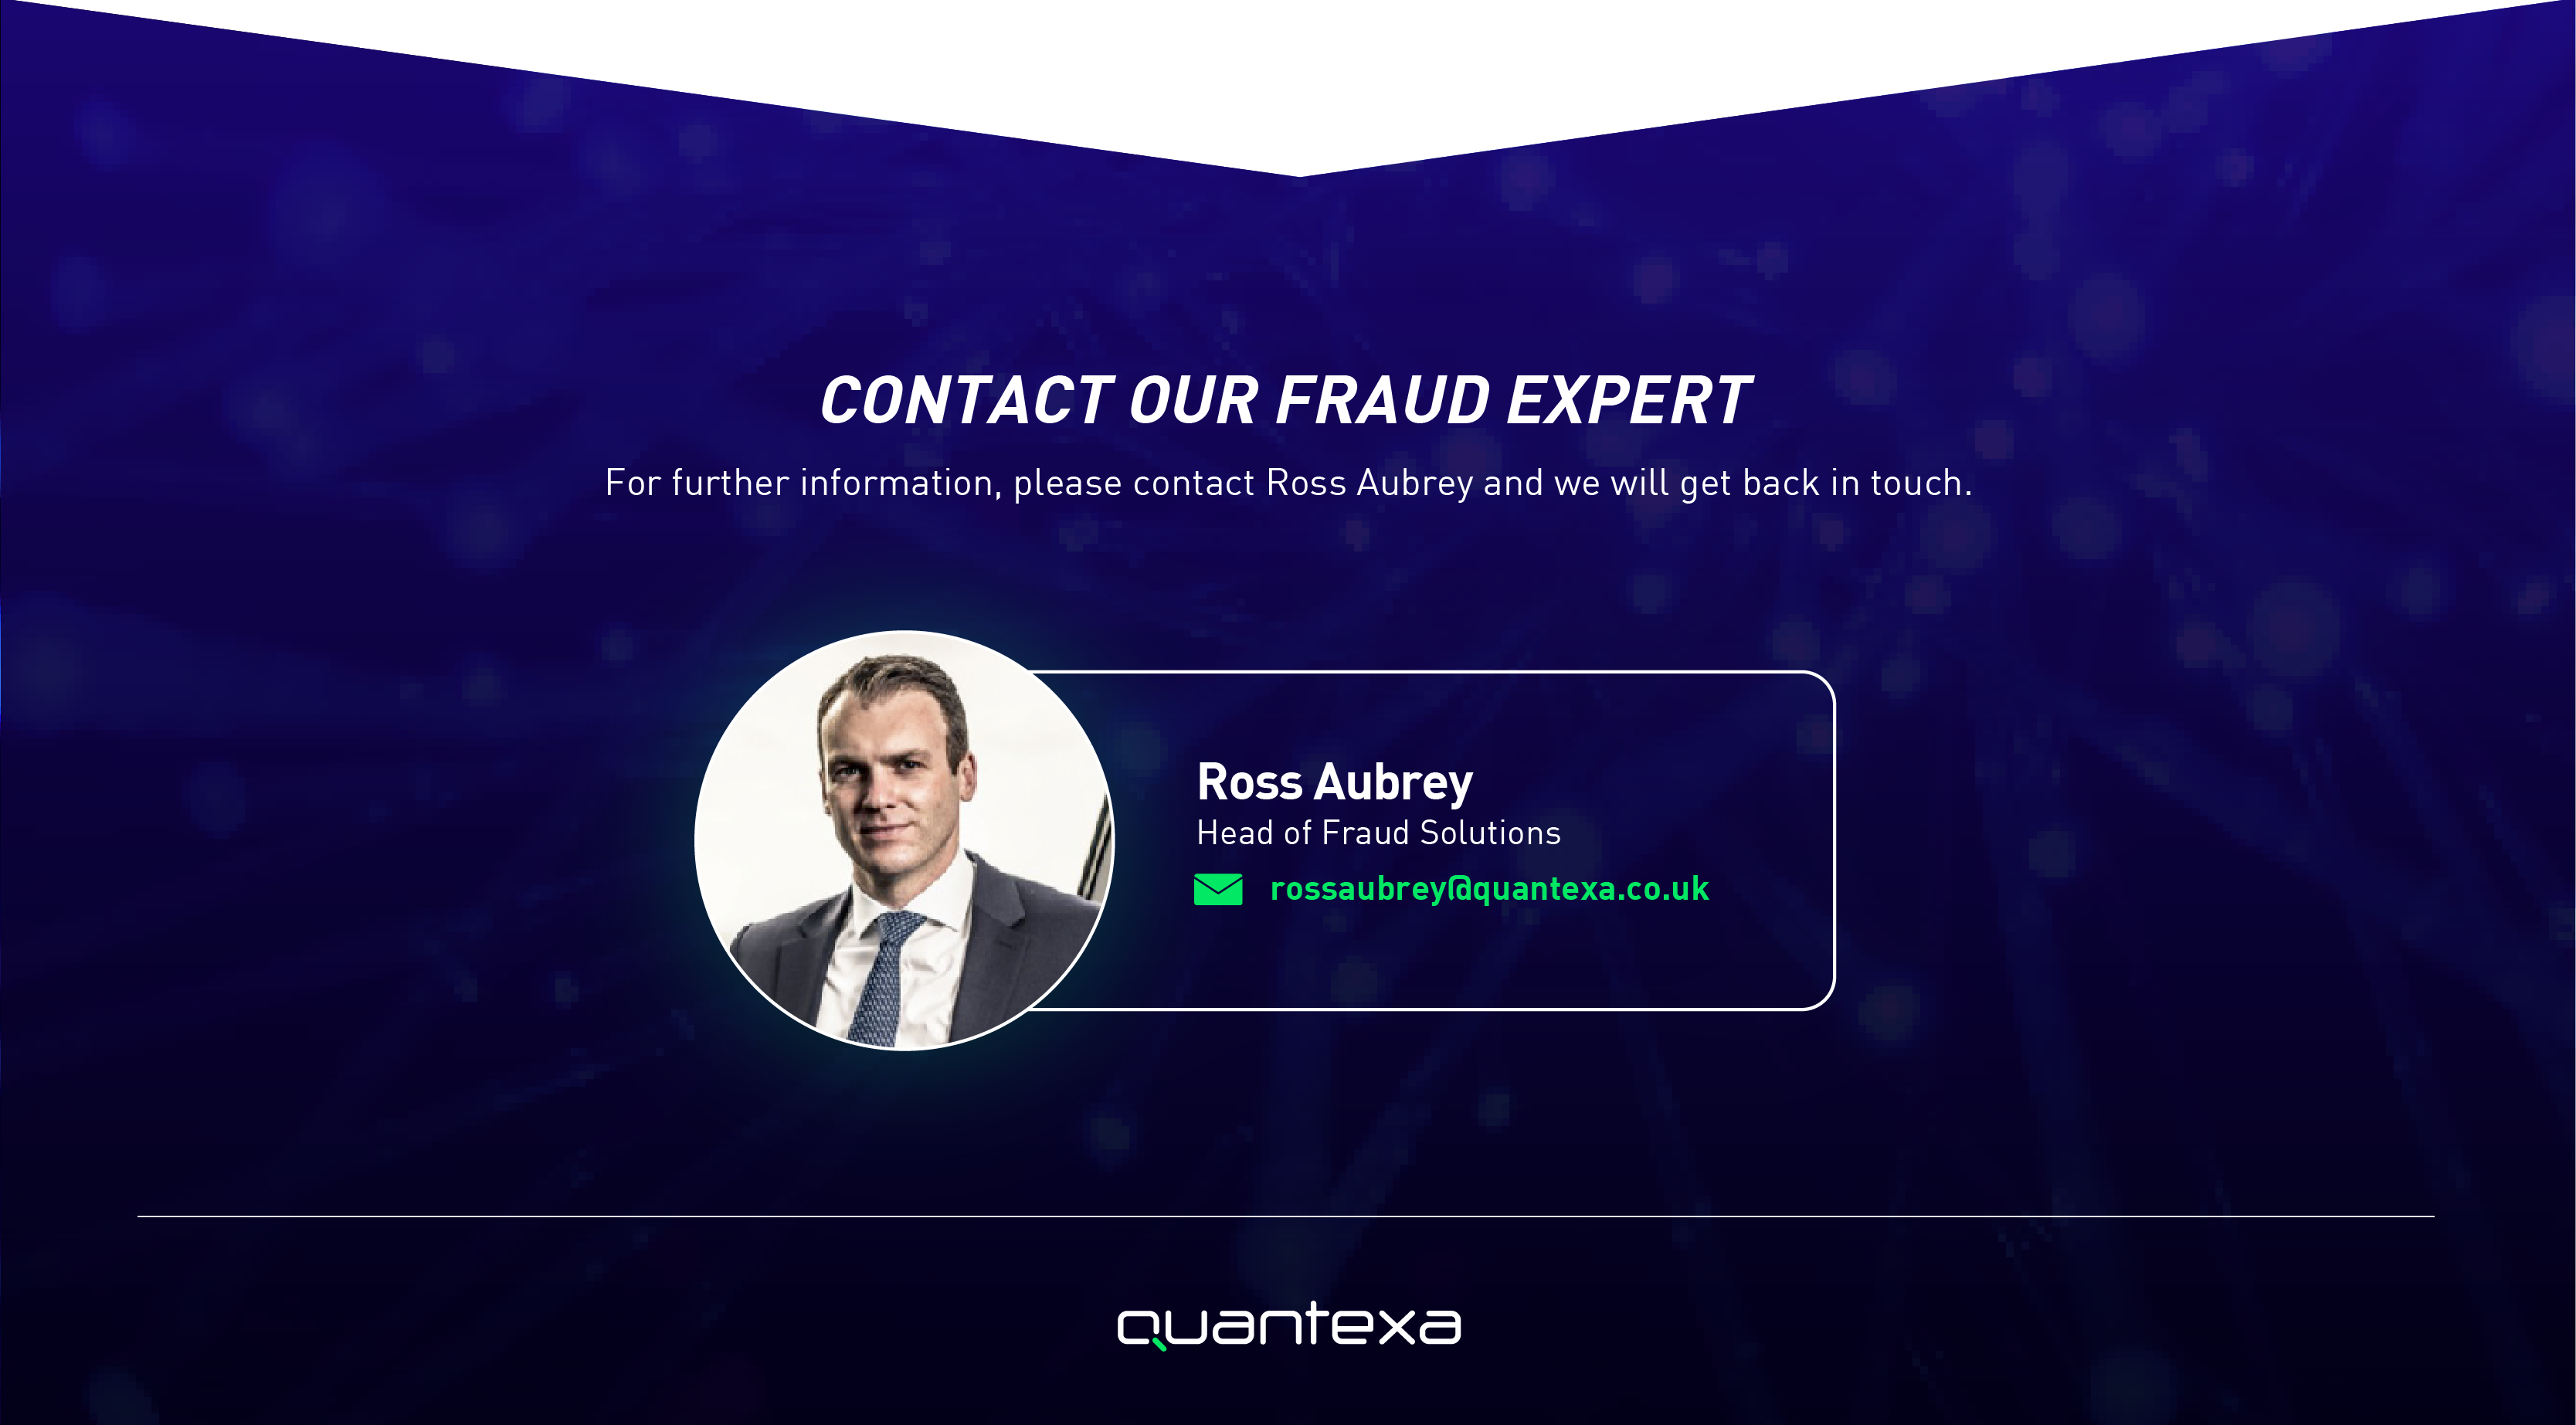 Contact our Fraud Expert